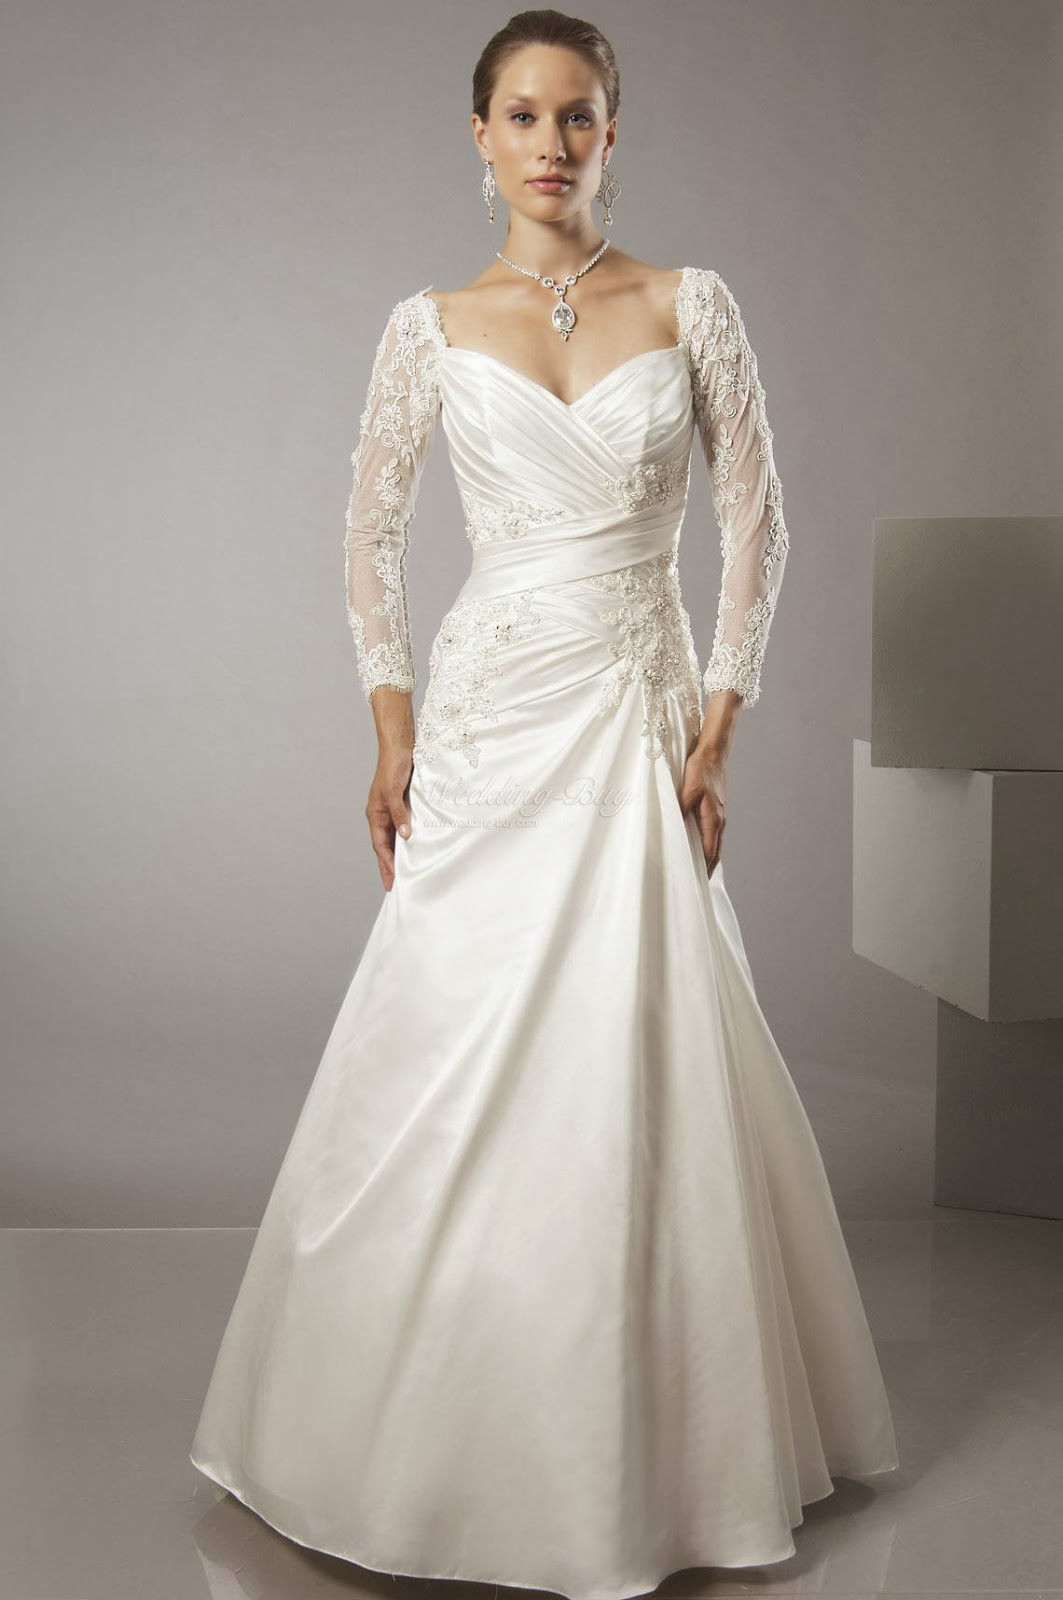 2nd Wedding Dresses
 Wedding Dresses For Second Marriages